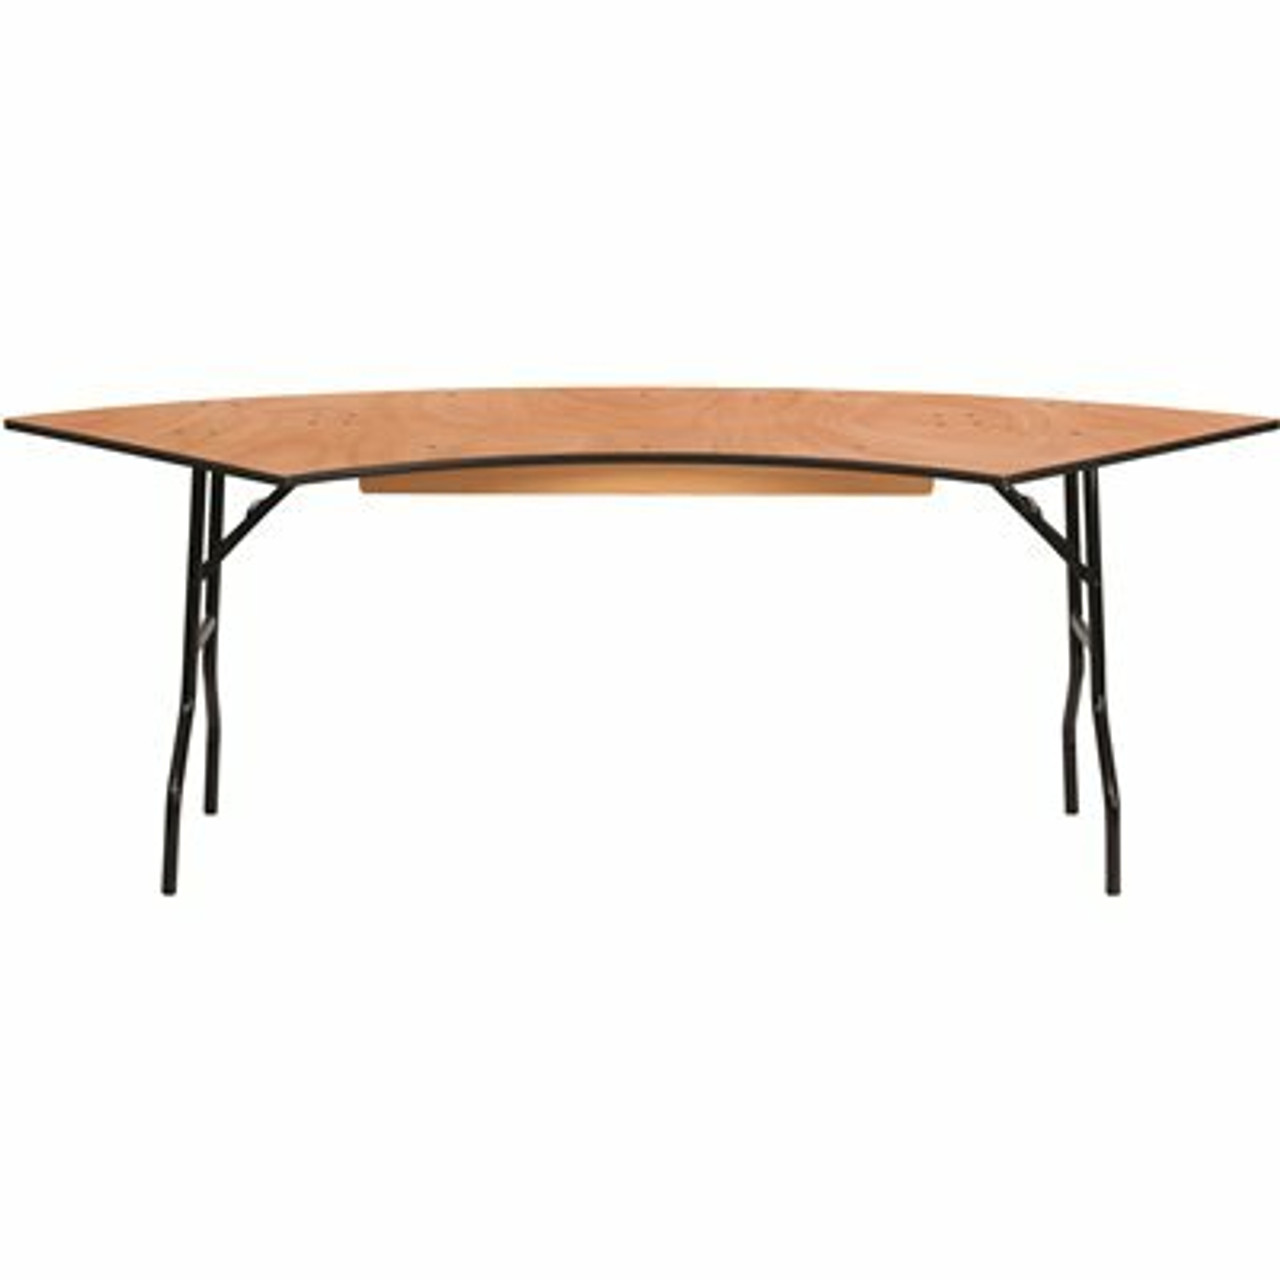 60 In. Natural Wood Tabletop Metal Frame Folding Table - 308688144